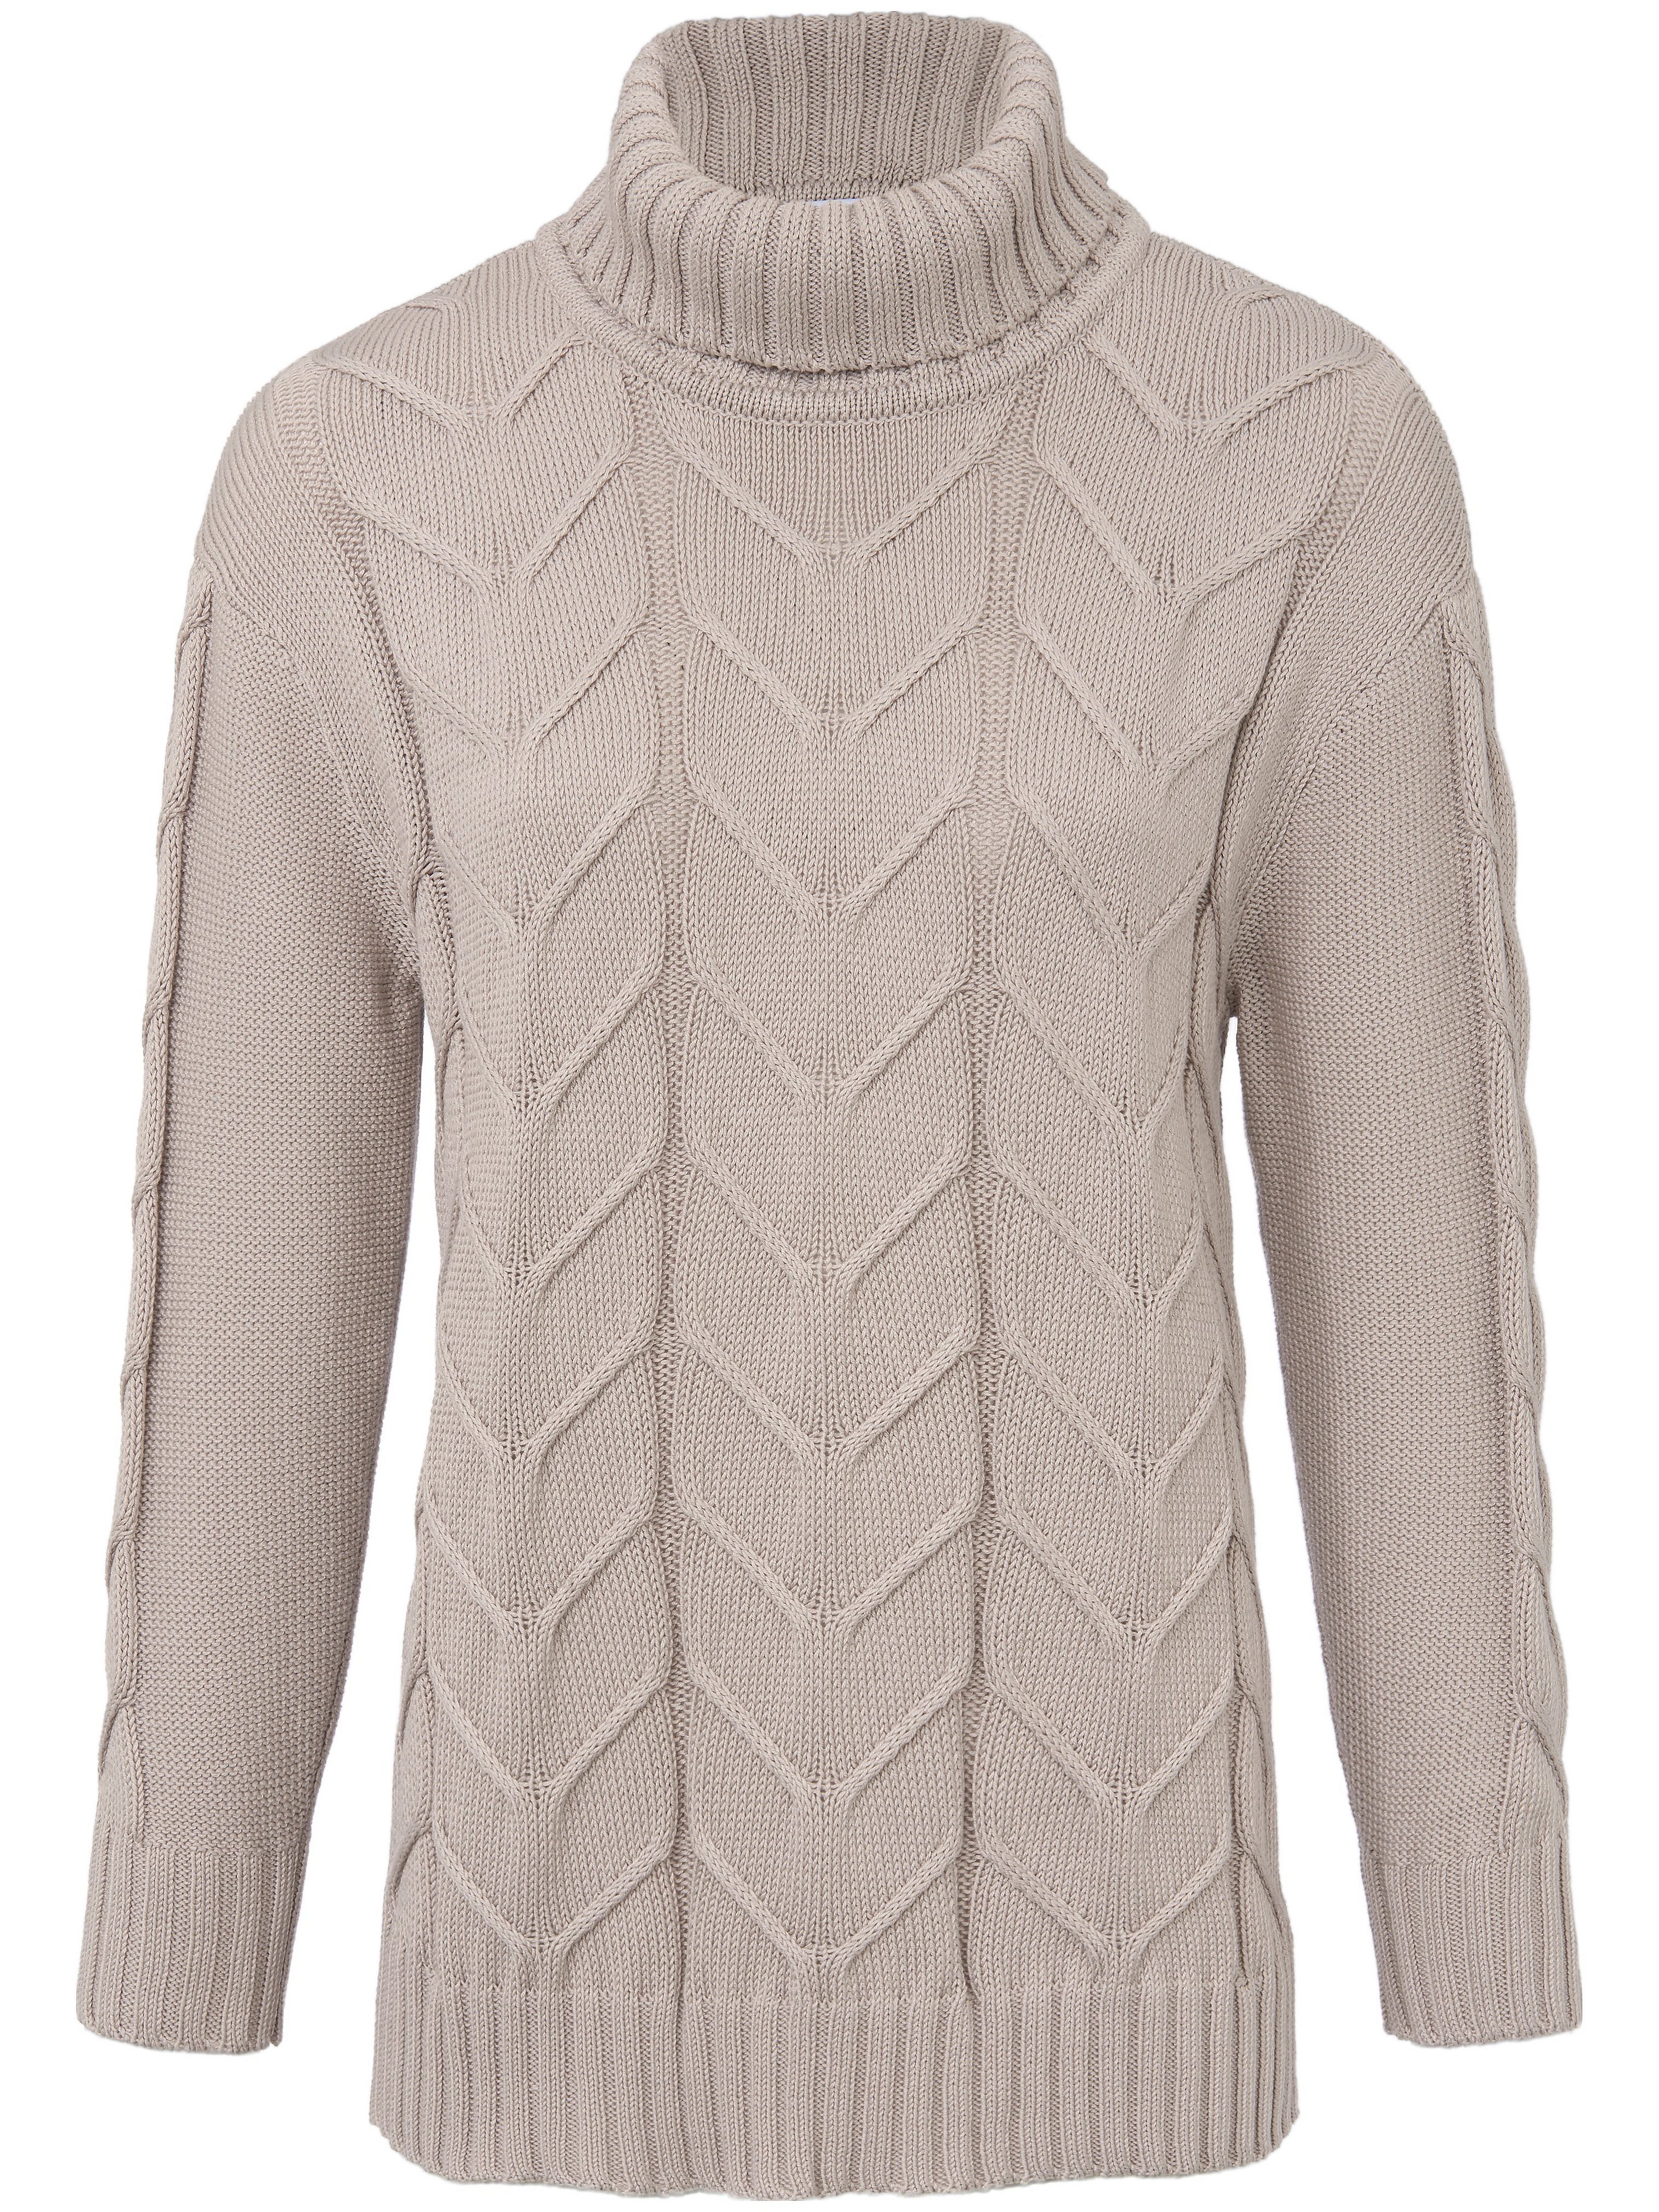 Le pull 100% coton  Looxent beige taille 38